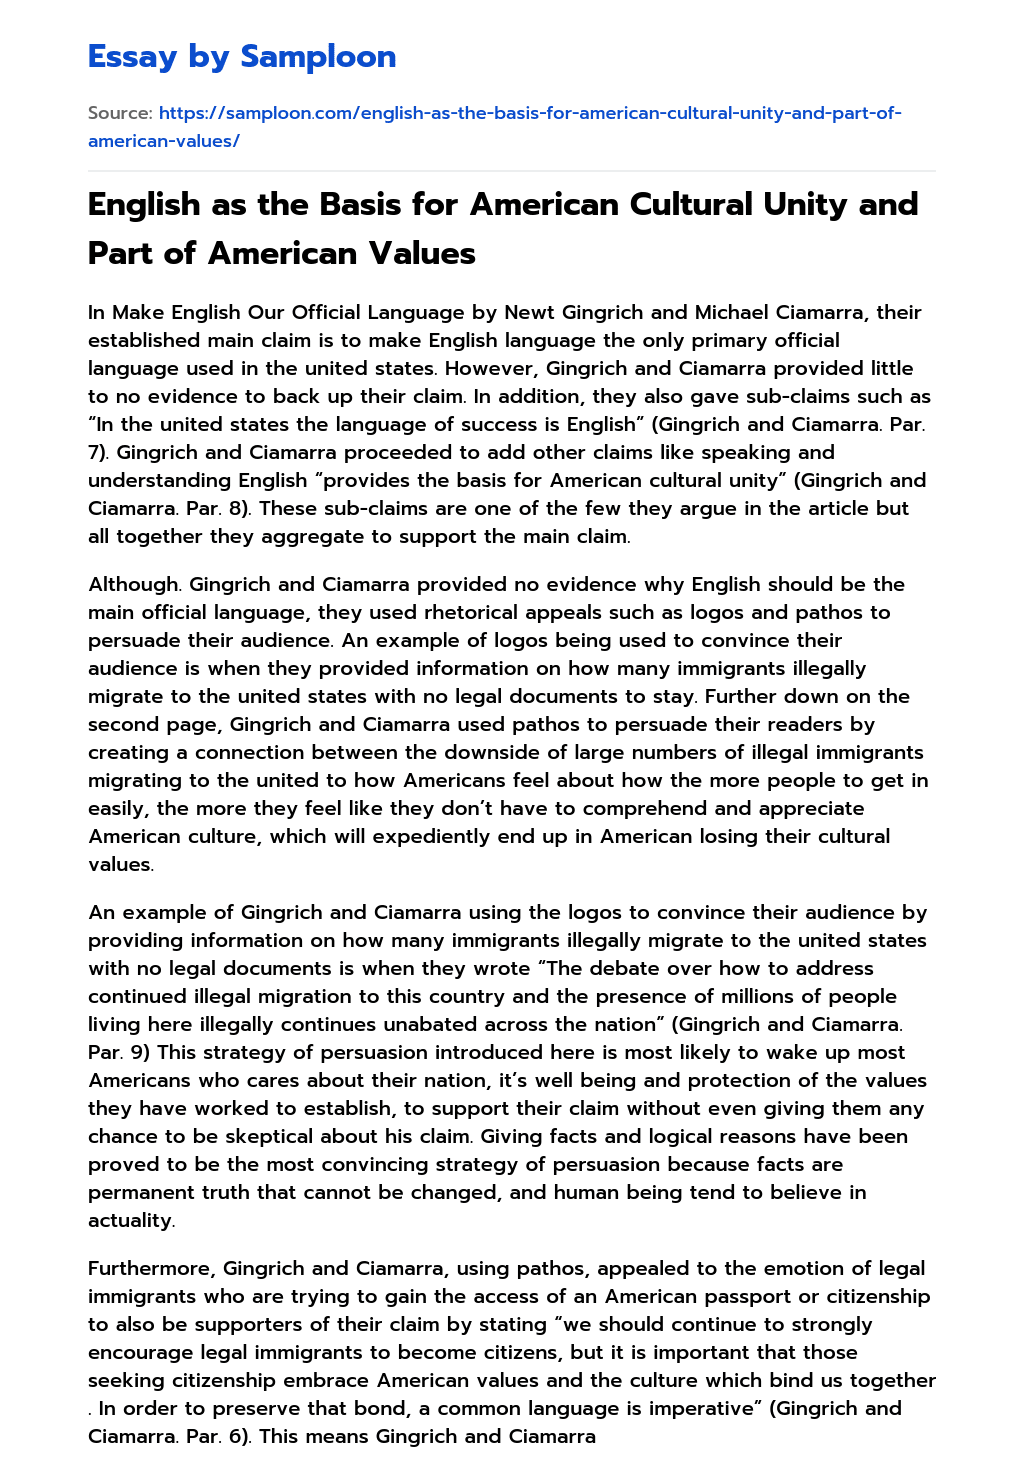 English as the Basis for American Cultural Unity and Part of American Values essay